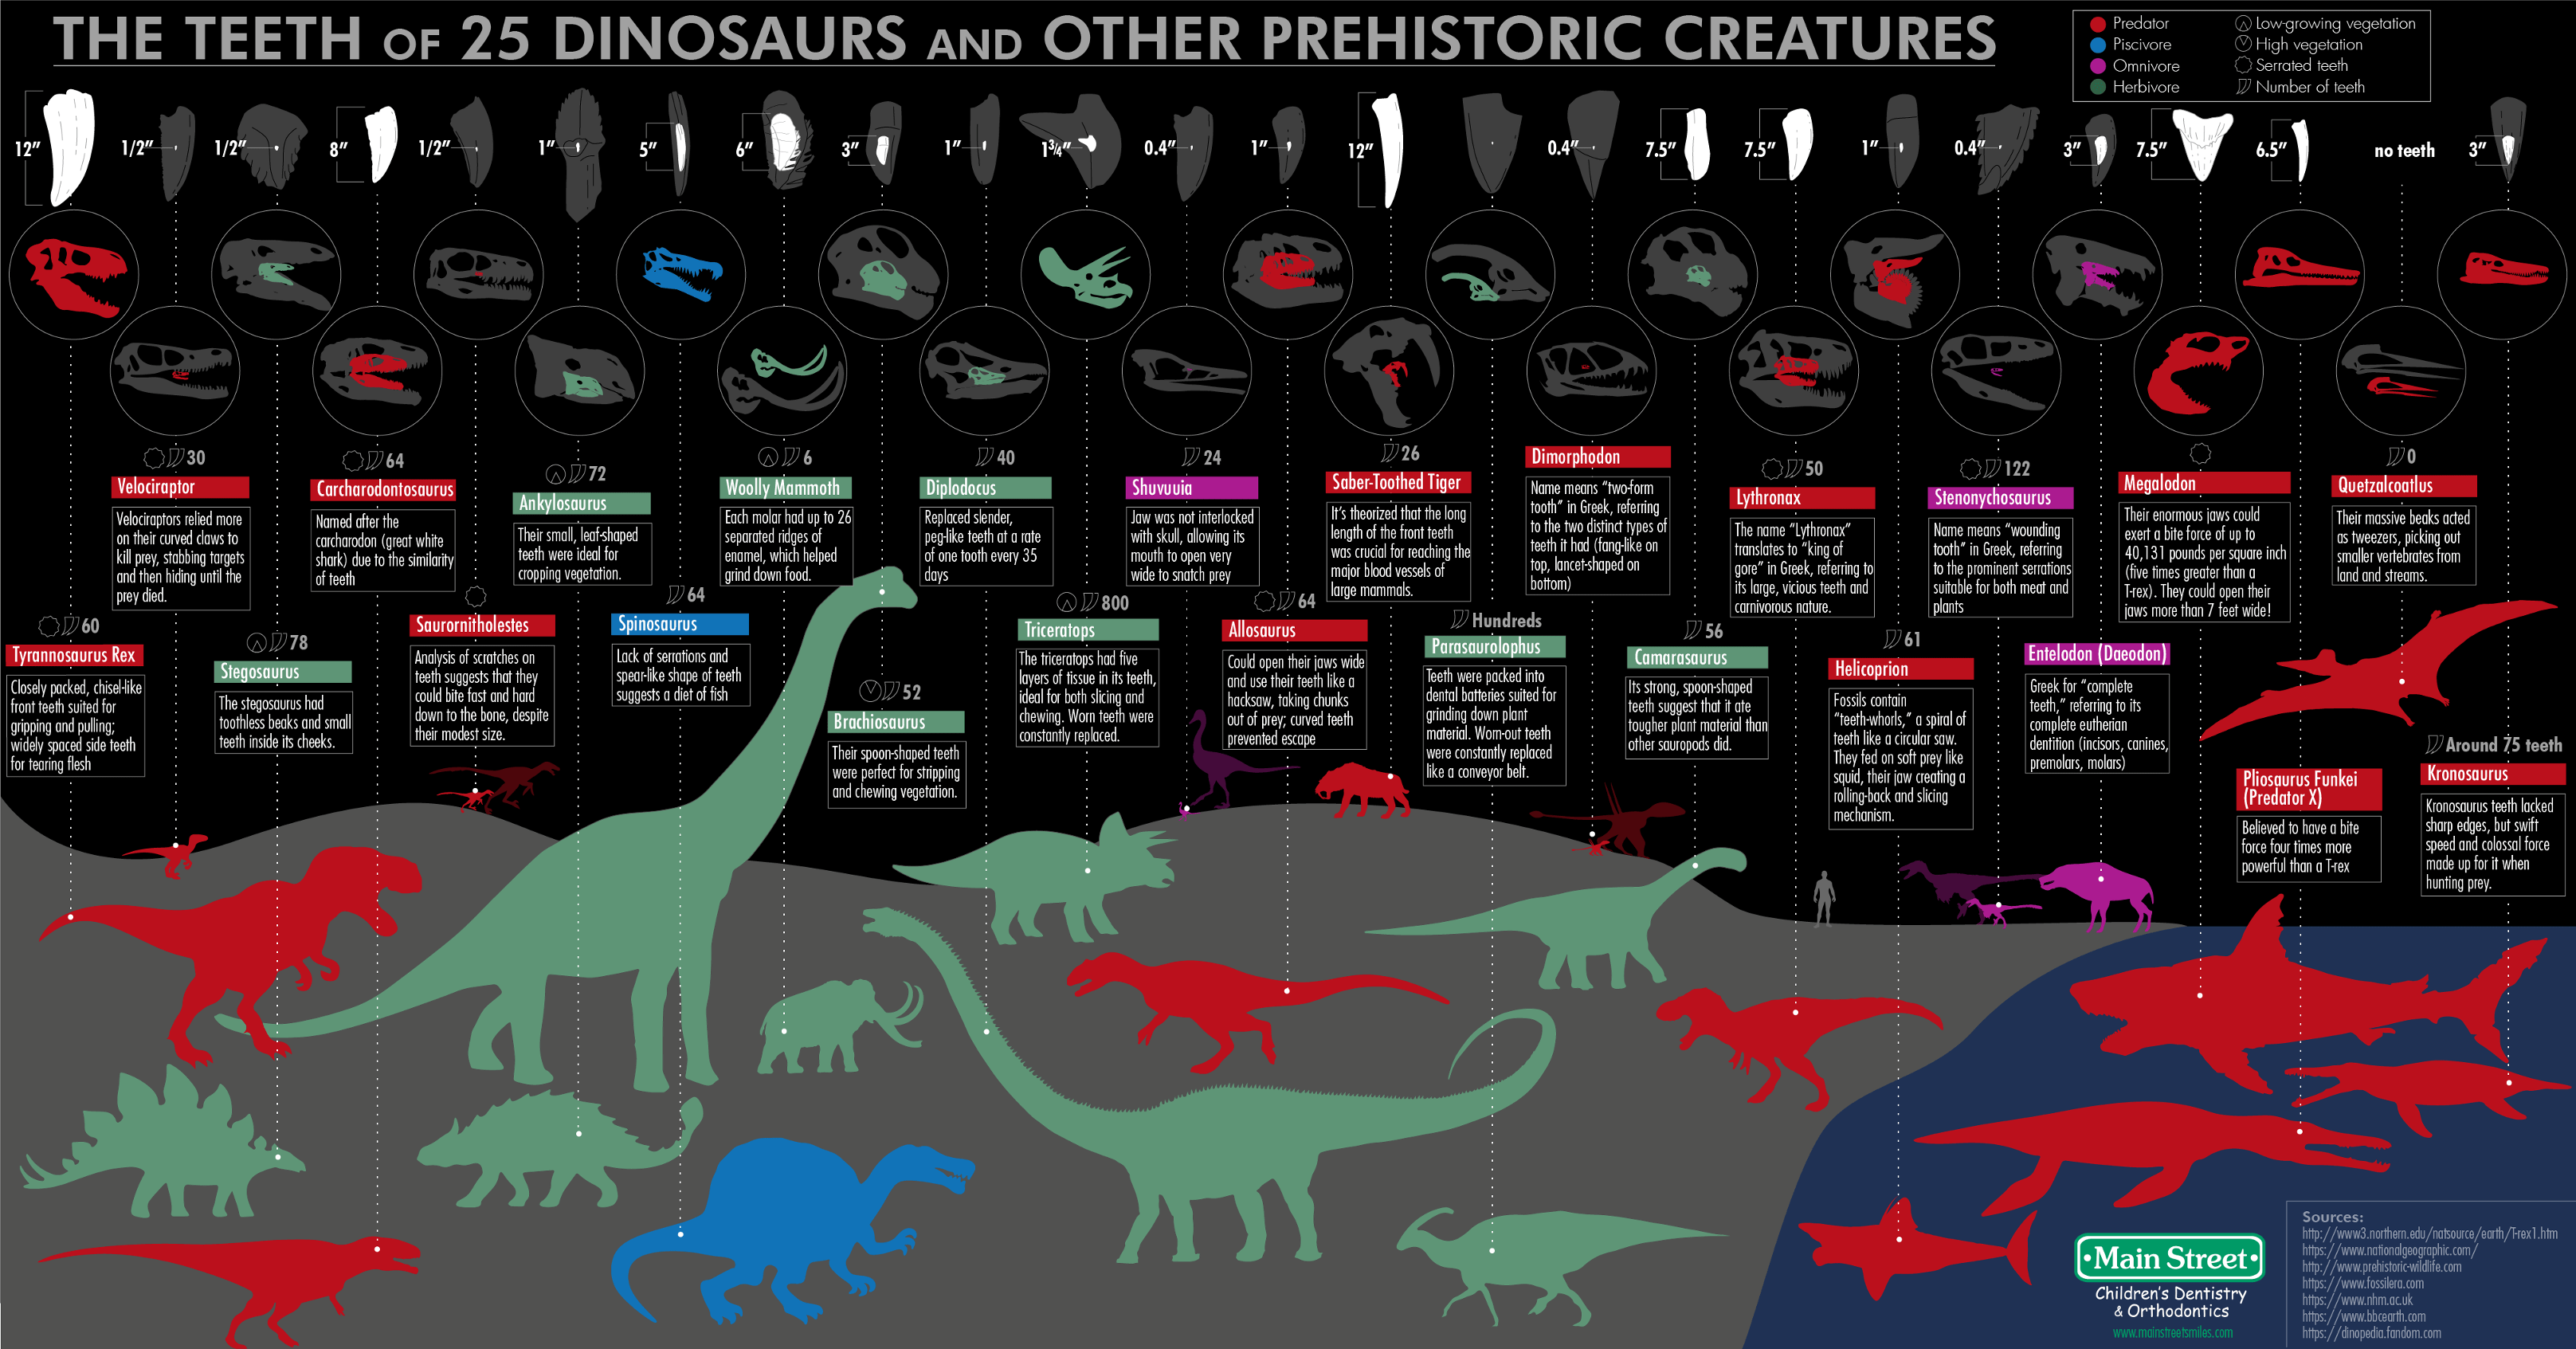 The Teeth of 25 Dinosaurs and Other Prehistoric Creatures - MainStreetSmiles.com - Infographic